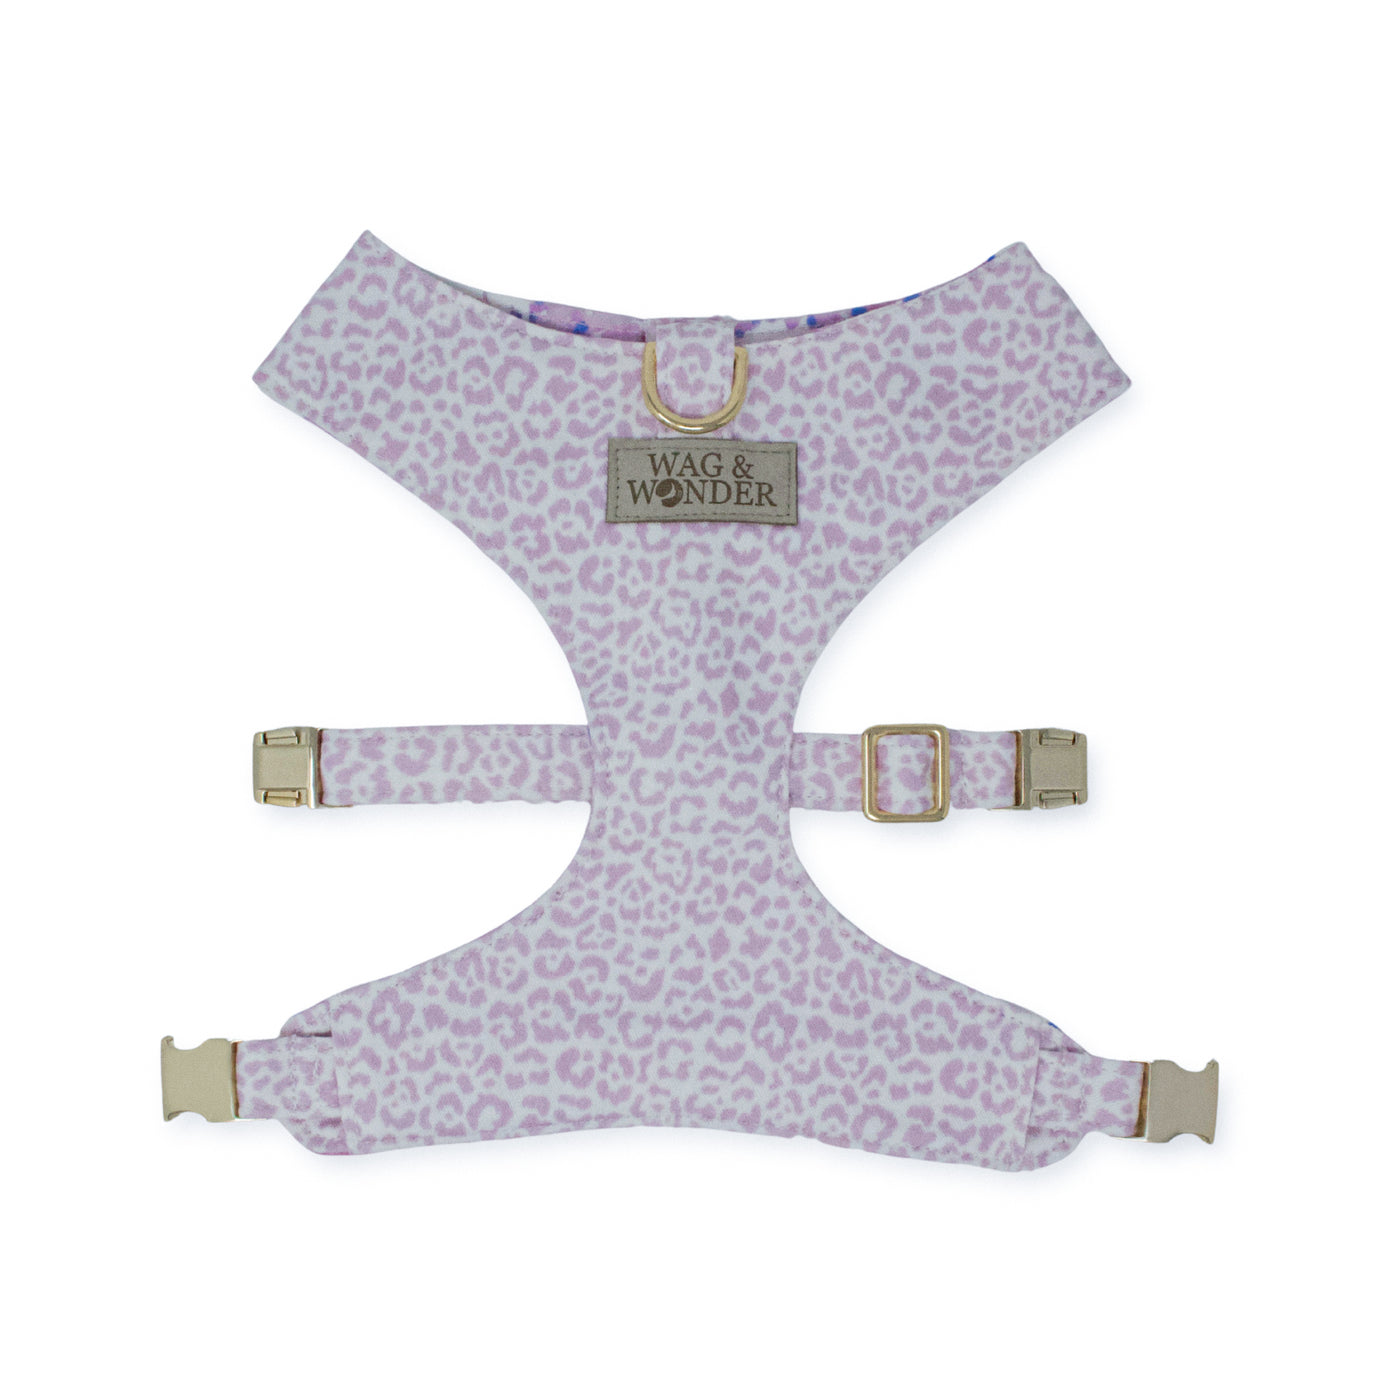 French Lavender Reversible Dog Harness